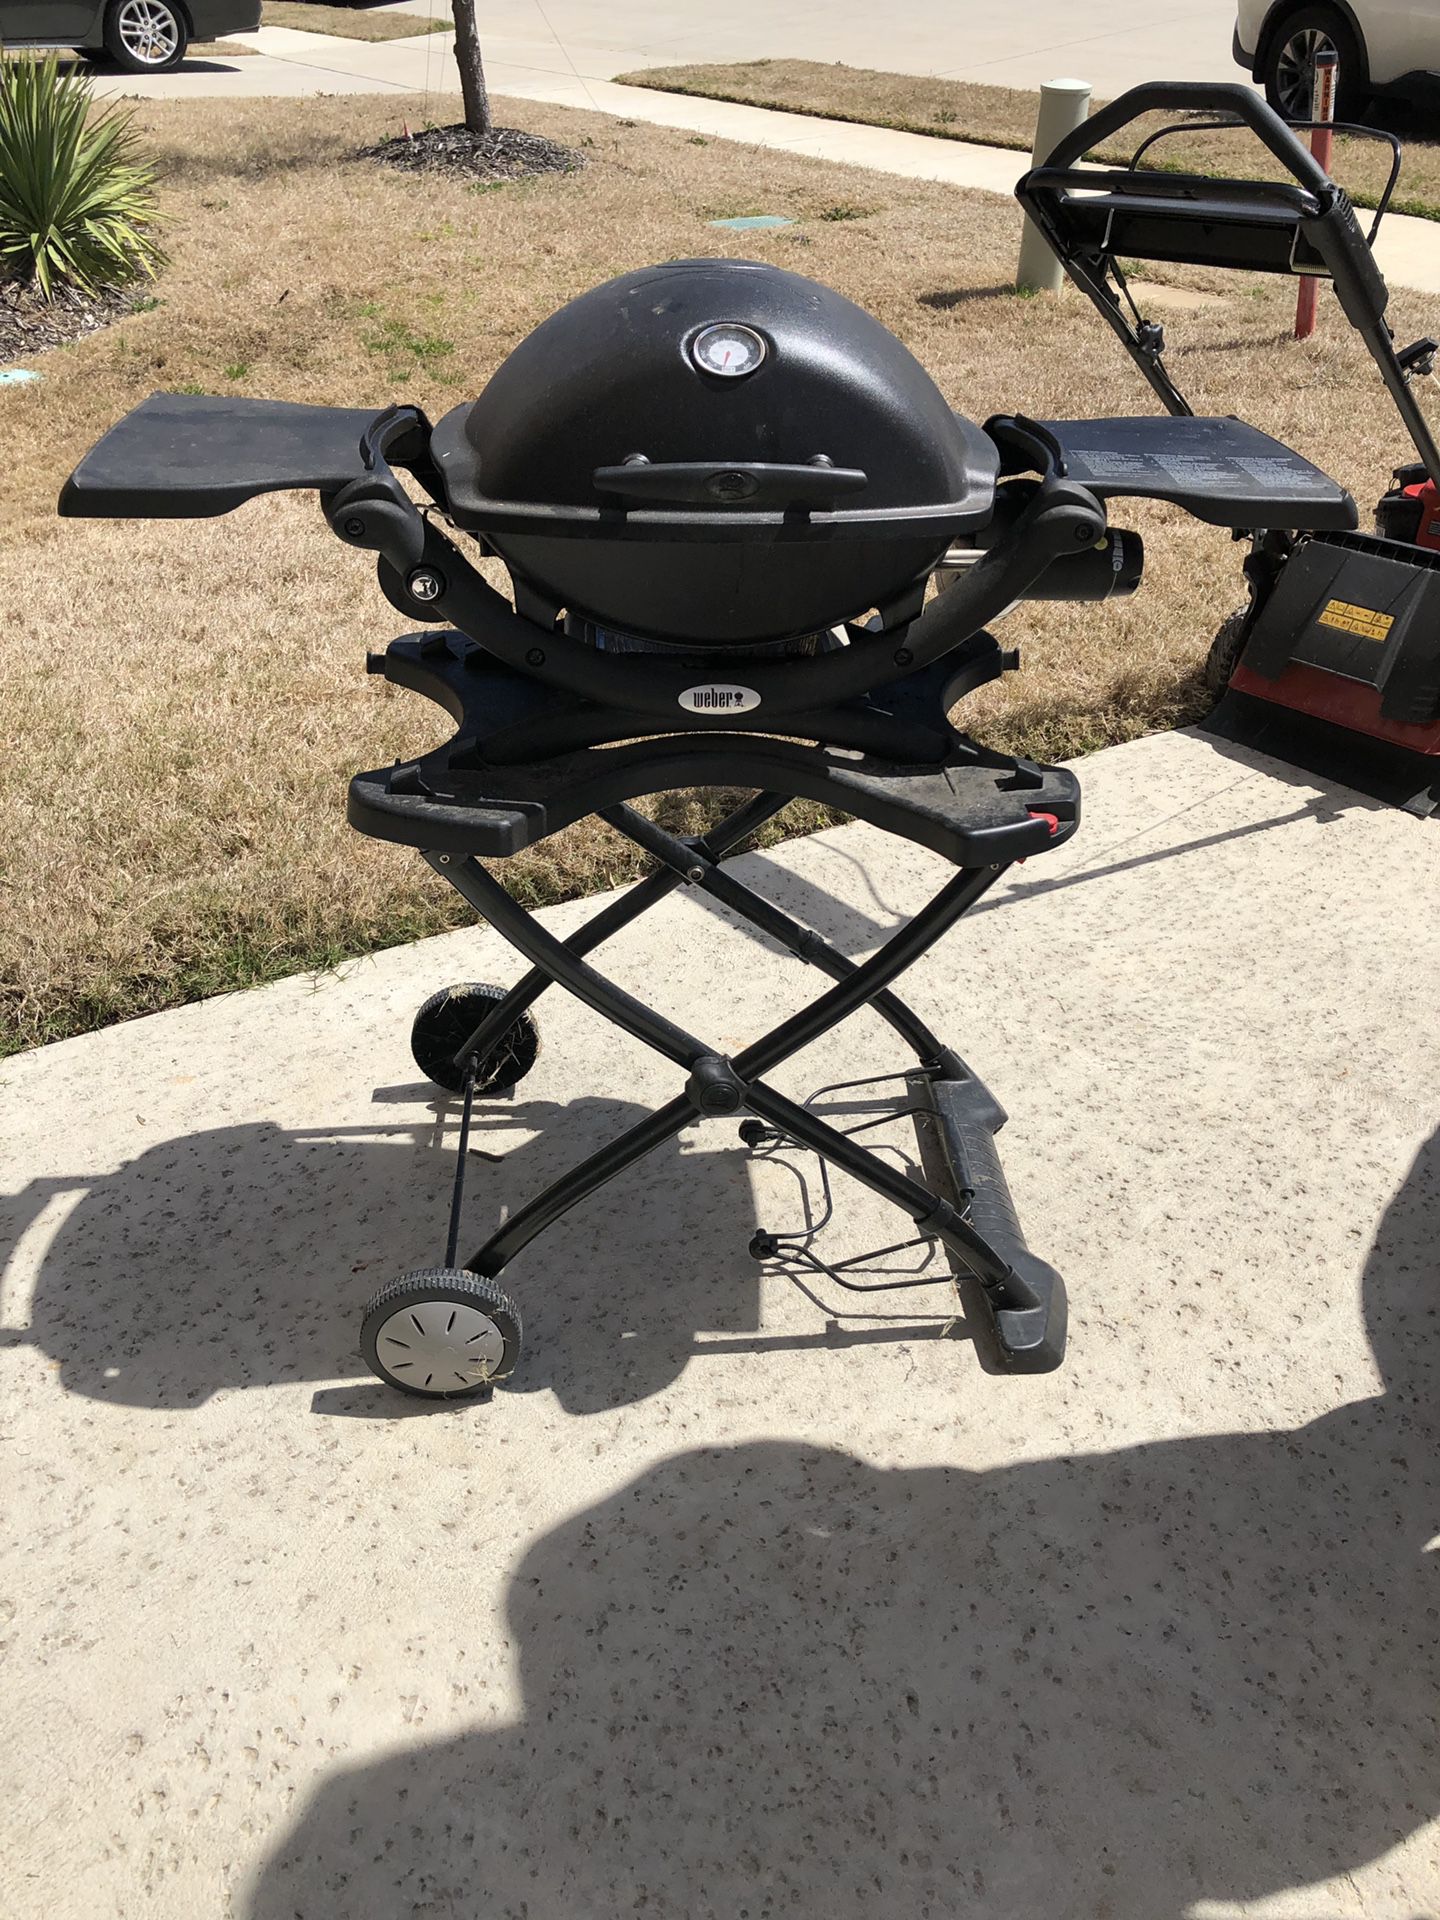 Portable Weber propane grill with cover